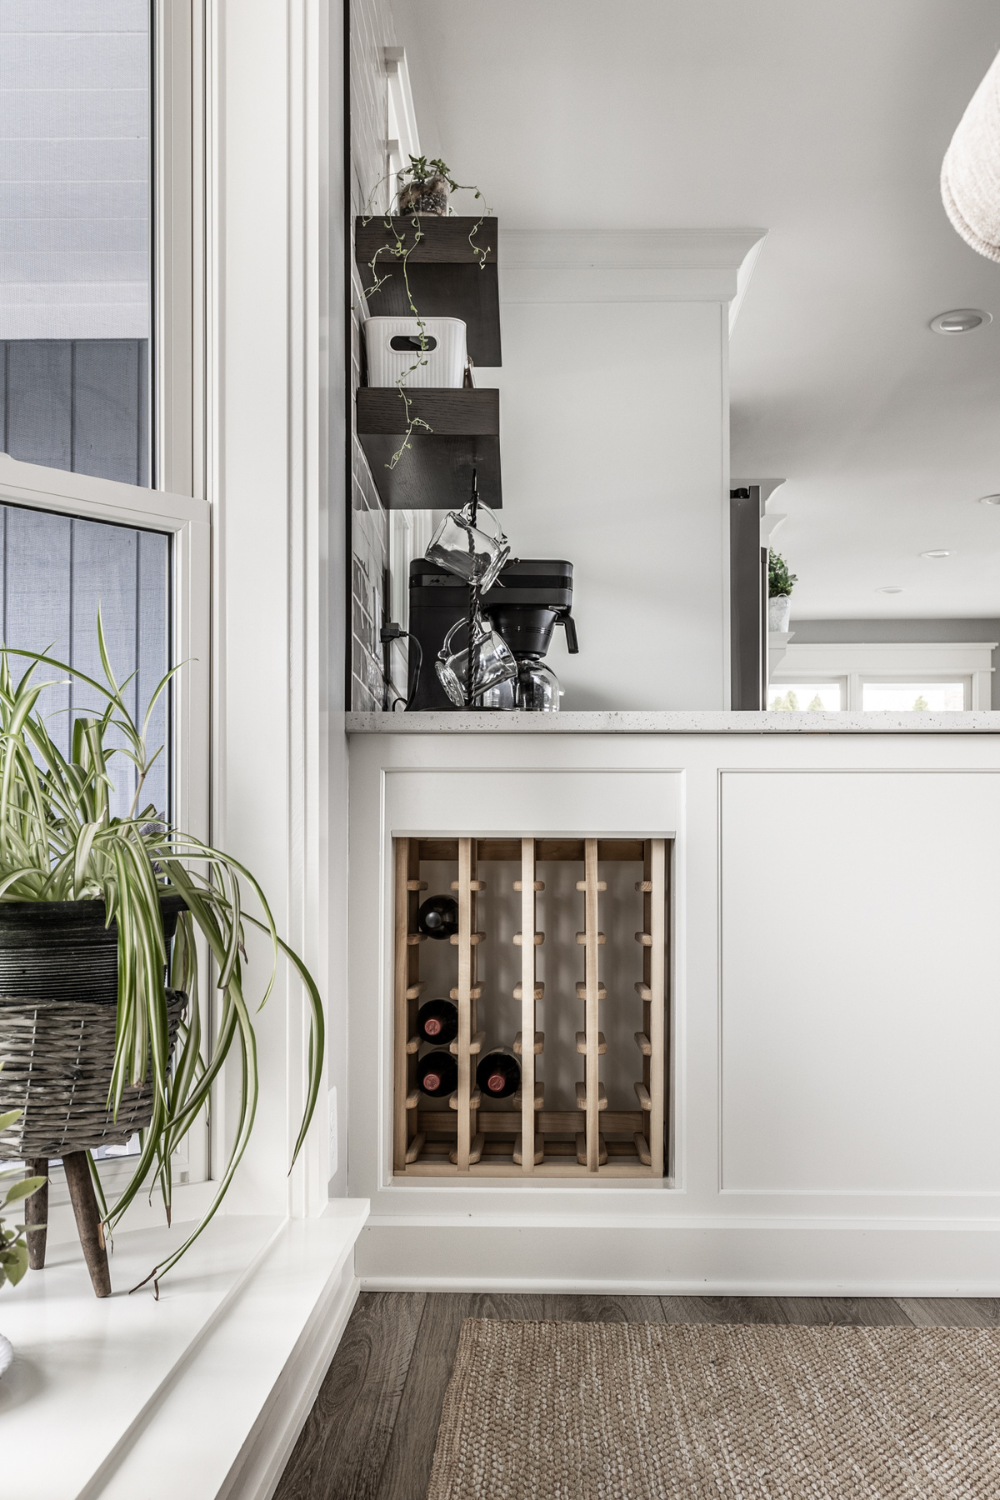 Nicholas Design Build | A white kitchen with a wine rack and a potted plant.